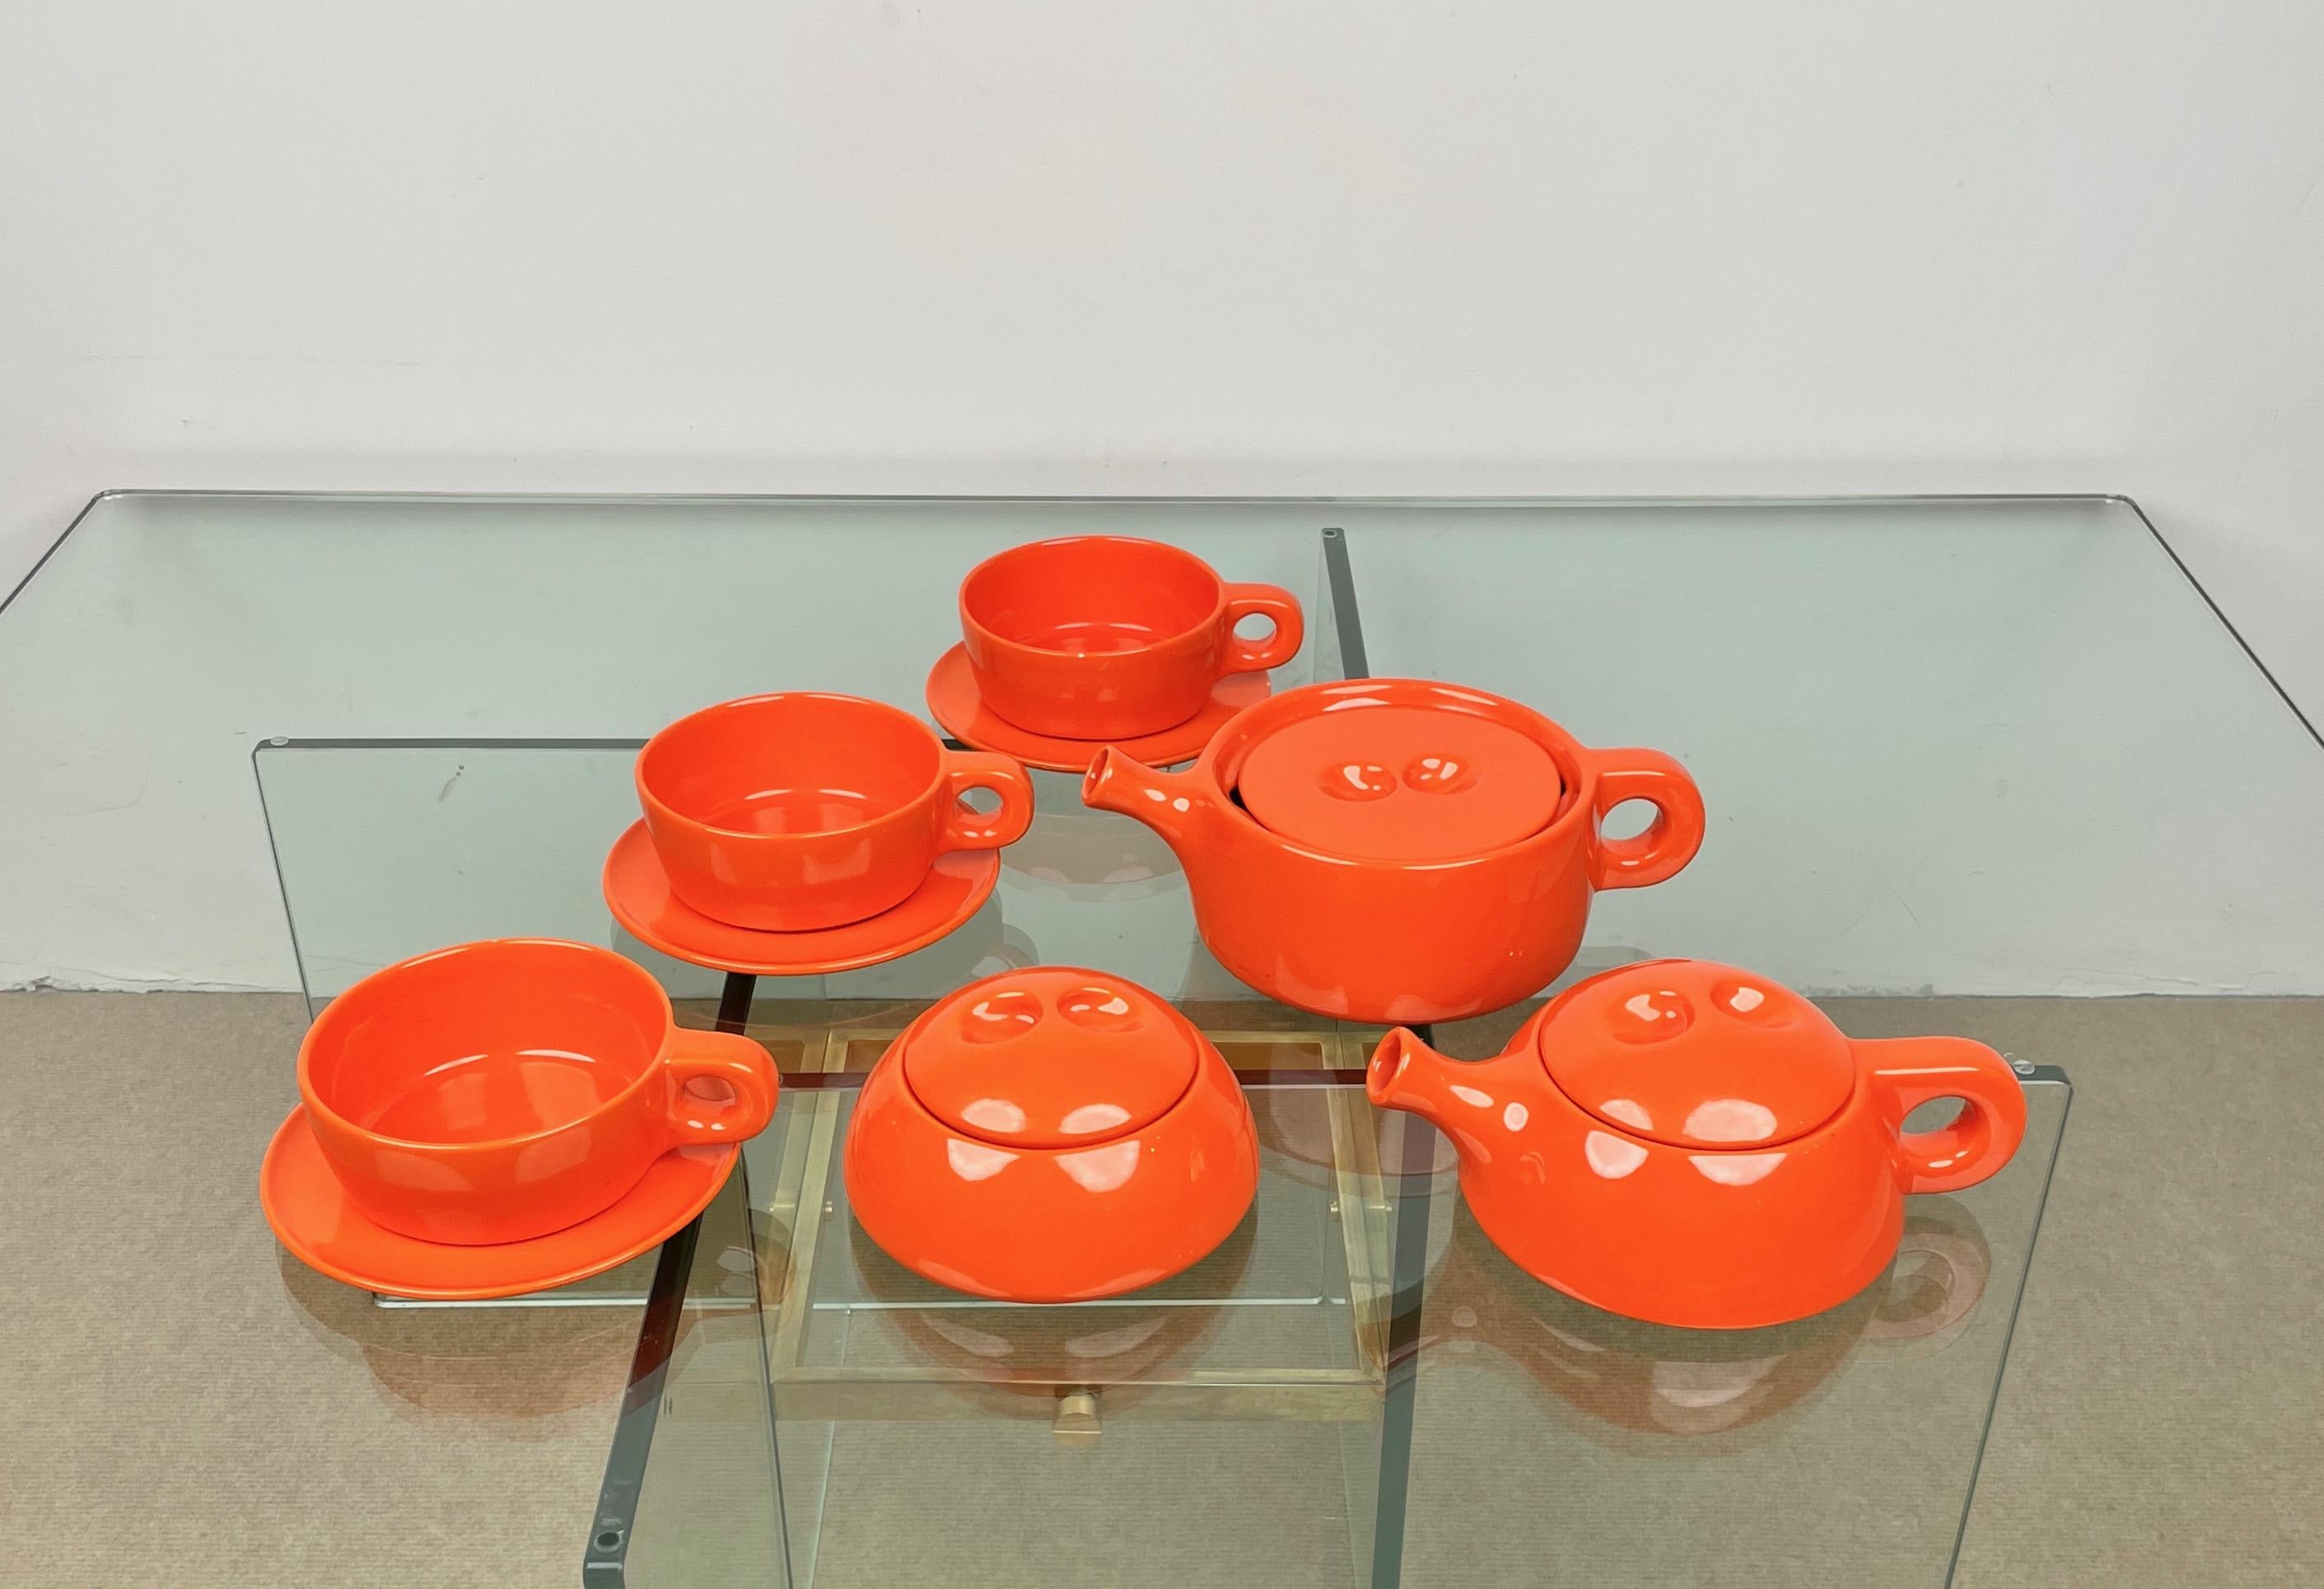 Stackable tea set in glazed orange ceramic, designed in the 1960s by the Finnish designer Liisi Beckmann for Gabbianelli. 

Consisting of: 2 teapots, 3 tea cups and a sugar bowl. 

The original label is still attached on the bottom, as shown in